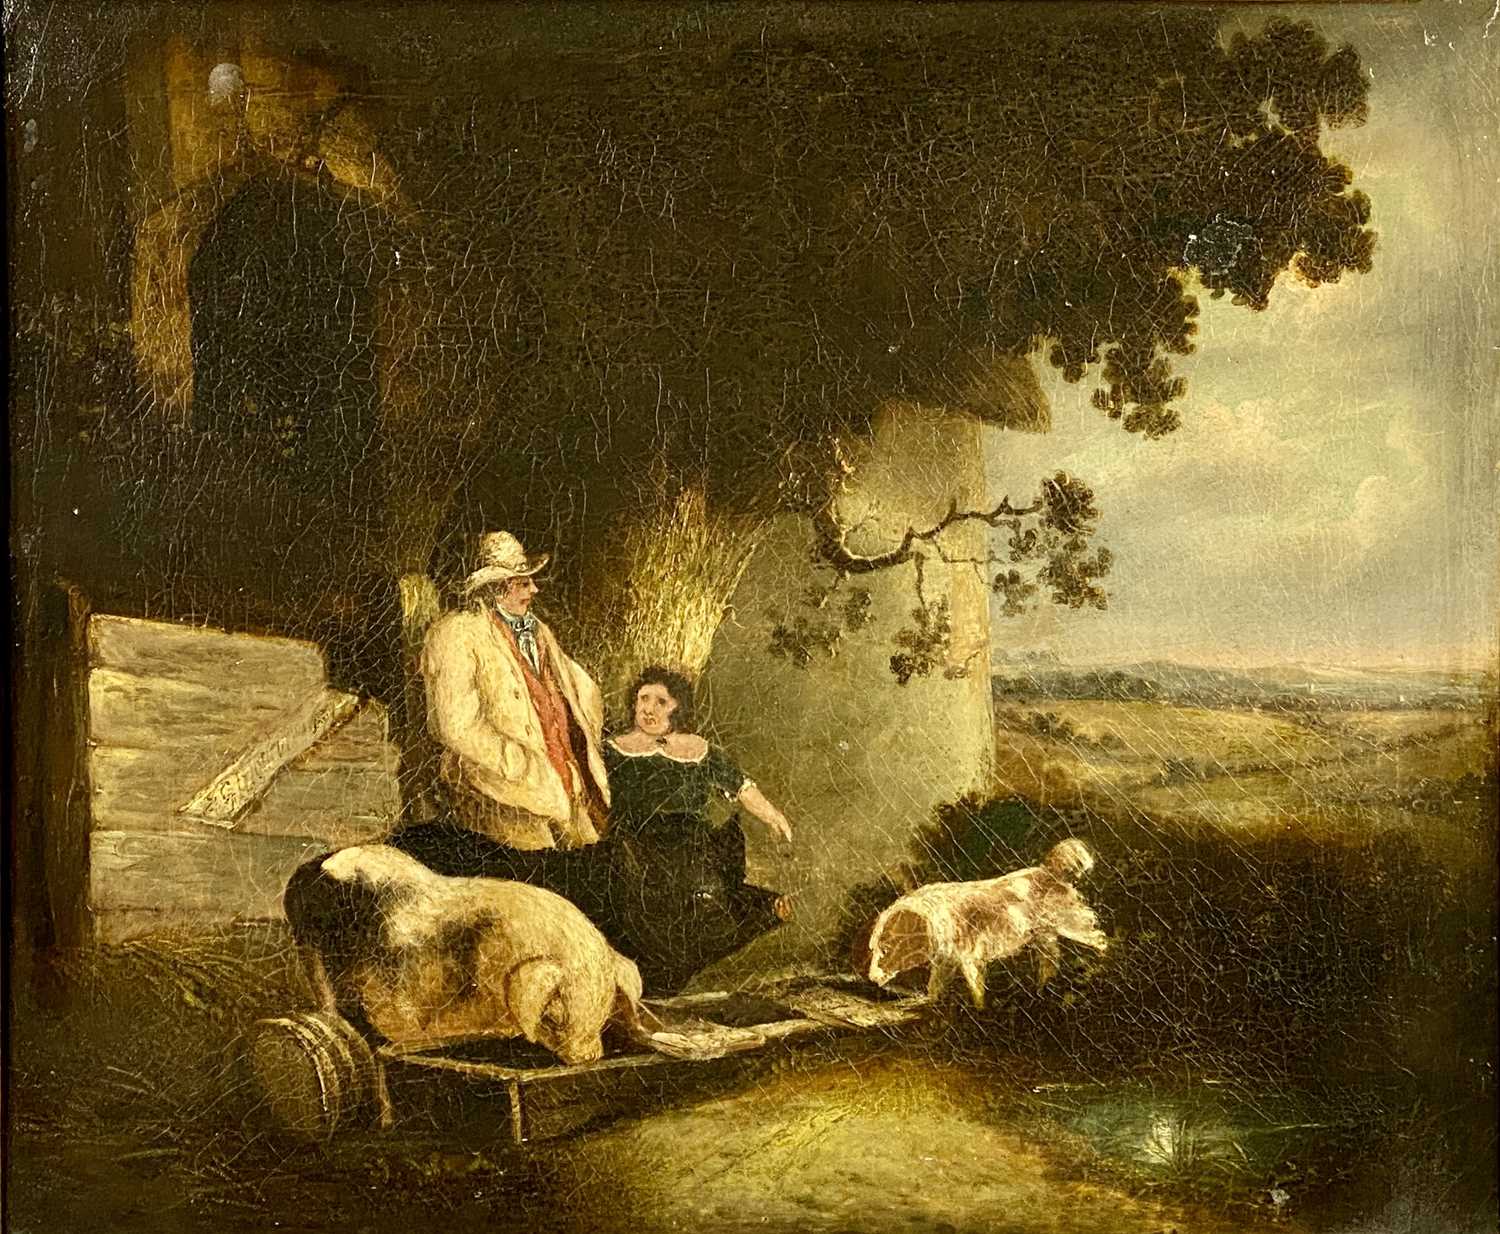 19TH CENTURY BRITISH PRIMITIVE oil on canvas - farmer and wife with two pigs feeding from trough and